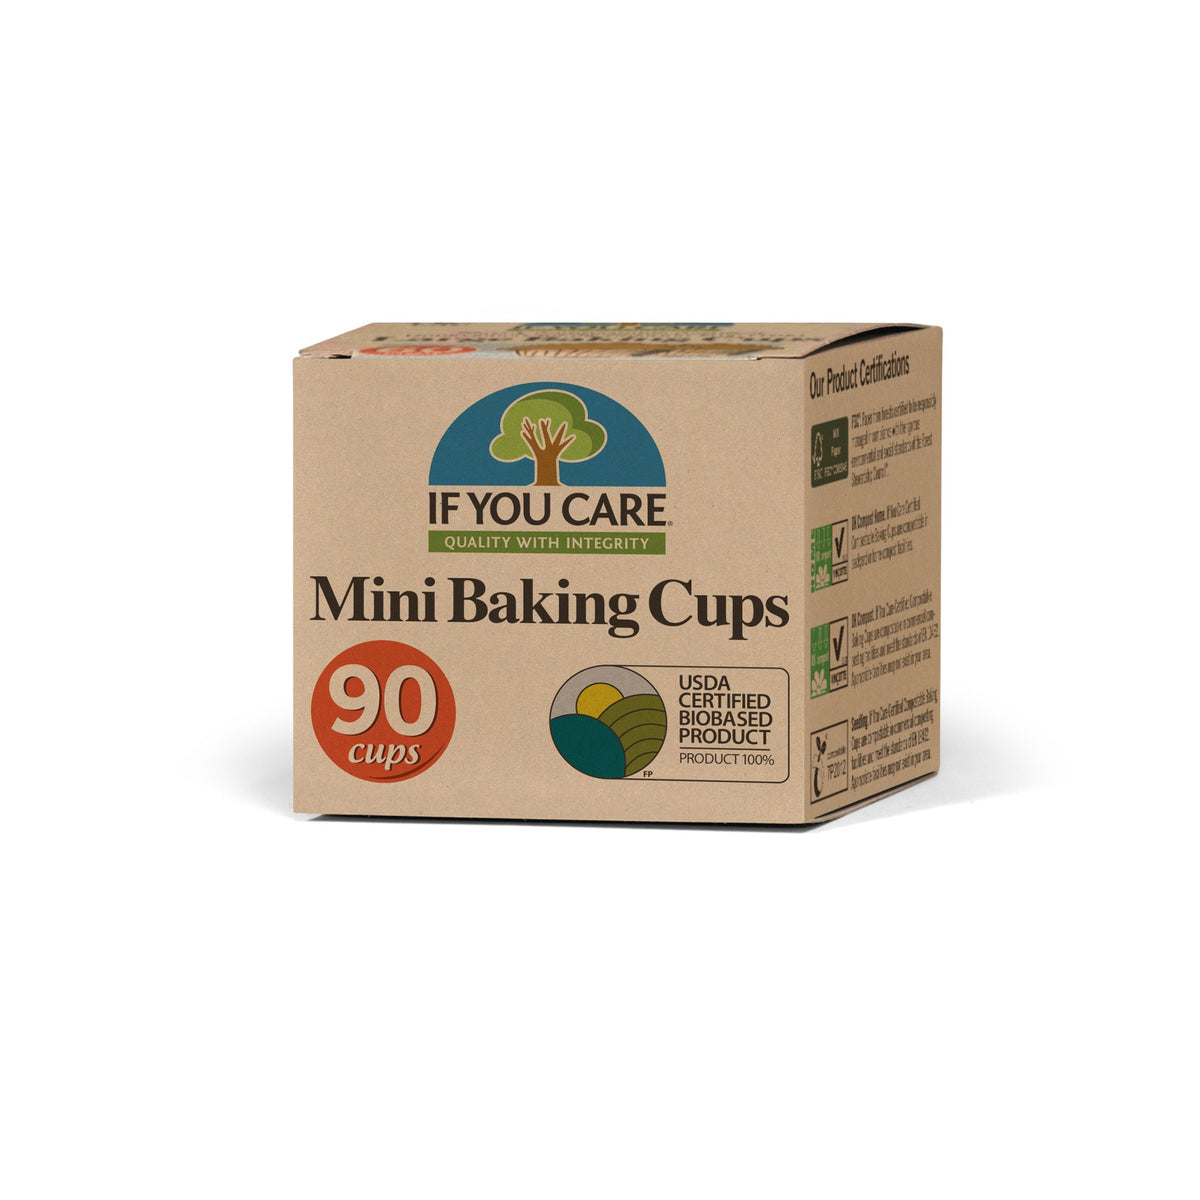 mini baking cups in package. 90 cups . usda certified biobased product seal